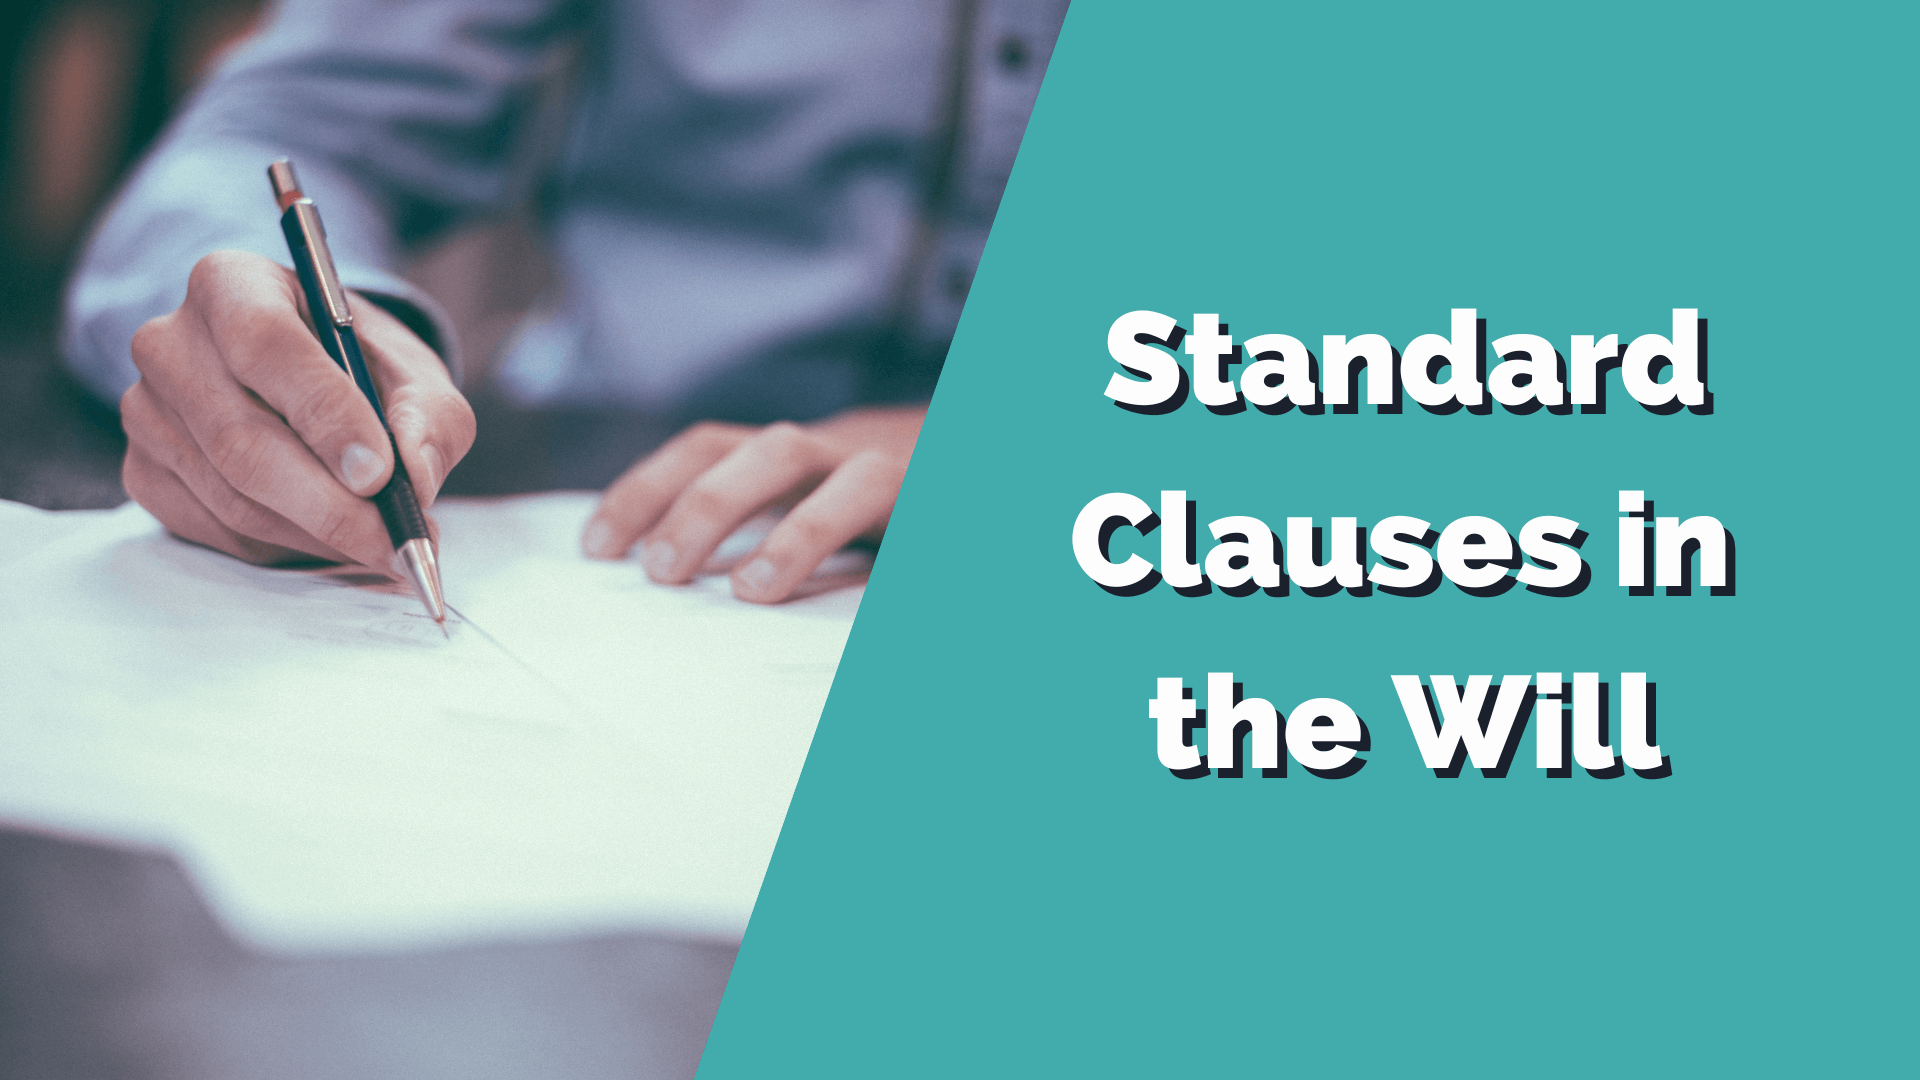 Standard clauses in the Singapore Will